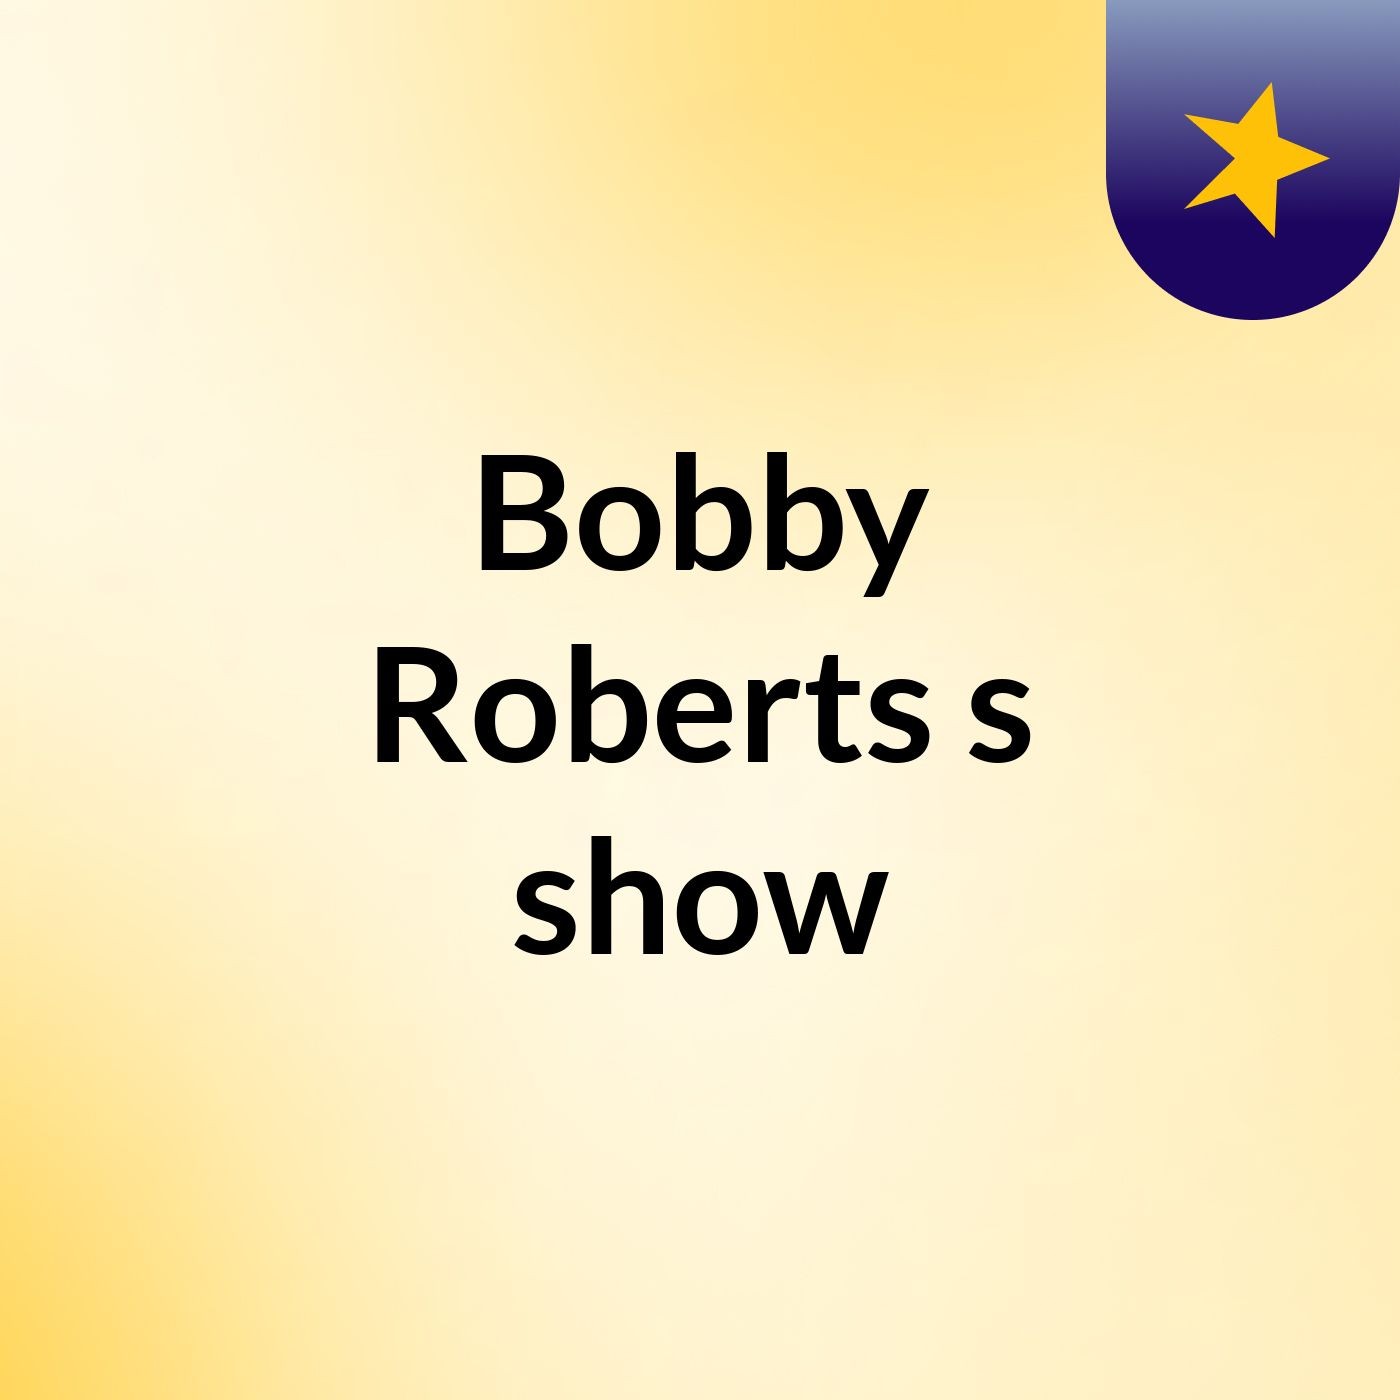 Bobby Roberts's show